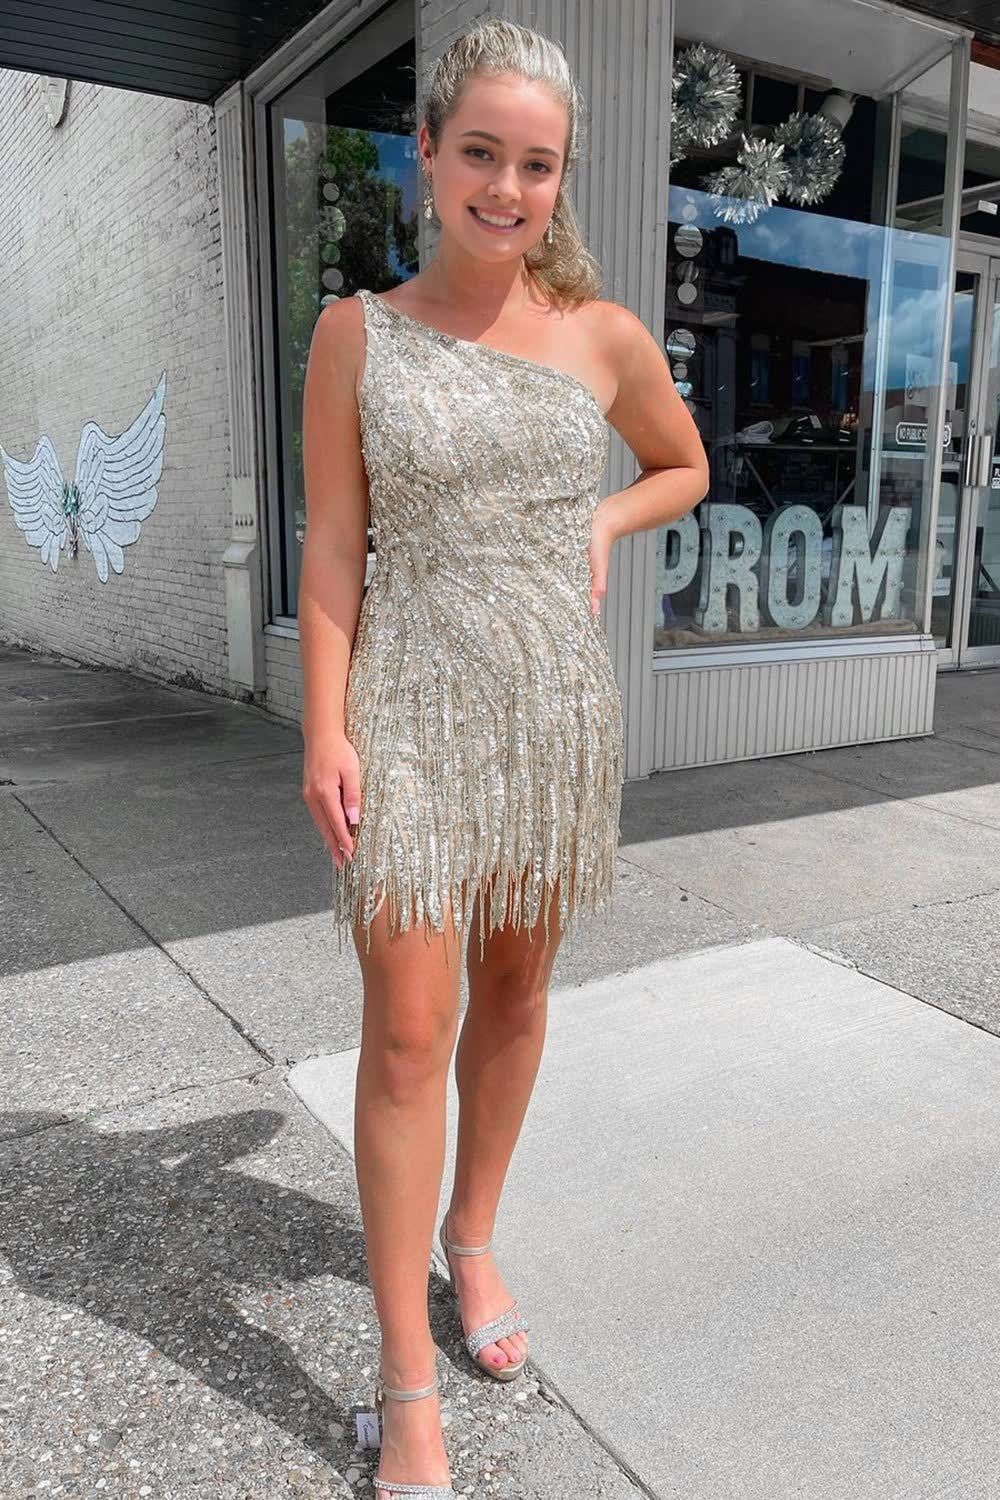 Sheath One Shoulder Silver Sequins Short Corset Homecoming Dress with Tassel Gowns, Sheath One Shoulder Silver Sequins Short Homecoming Dress with Tassel